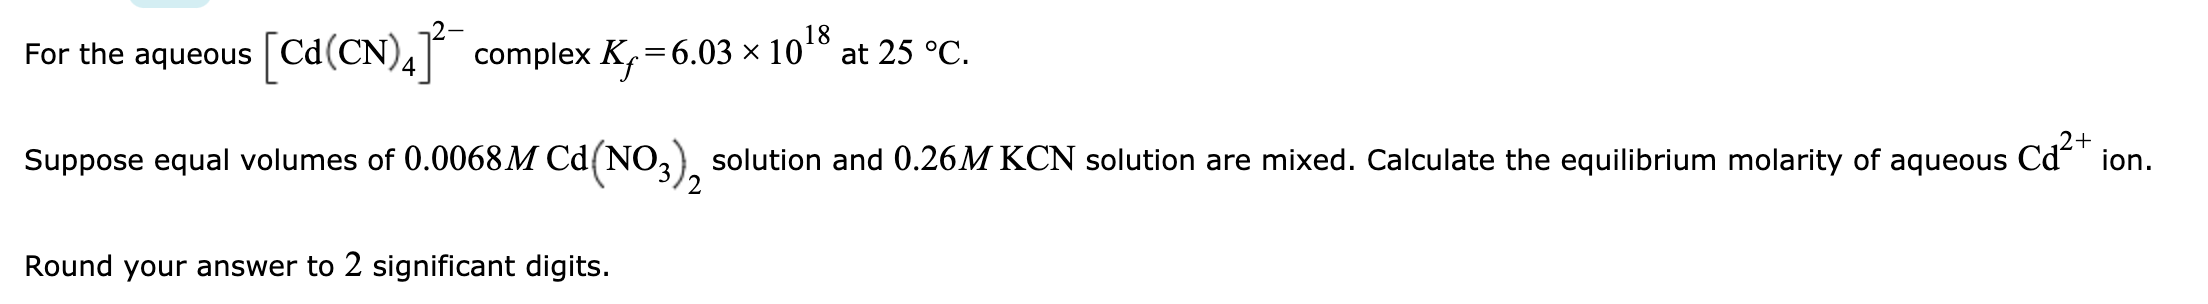 For the aqueous [Ca(CN)]-complex Ky=6.03 x 1018 at 25 ?C. ion. Suppose equal volumes of 0.0068M Ca(NO3), solution and 0.26M K